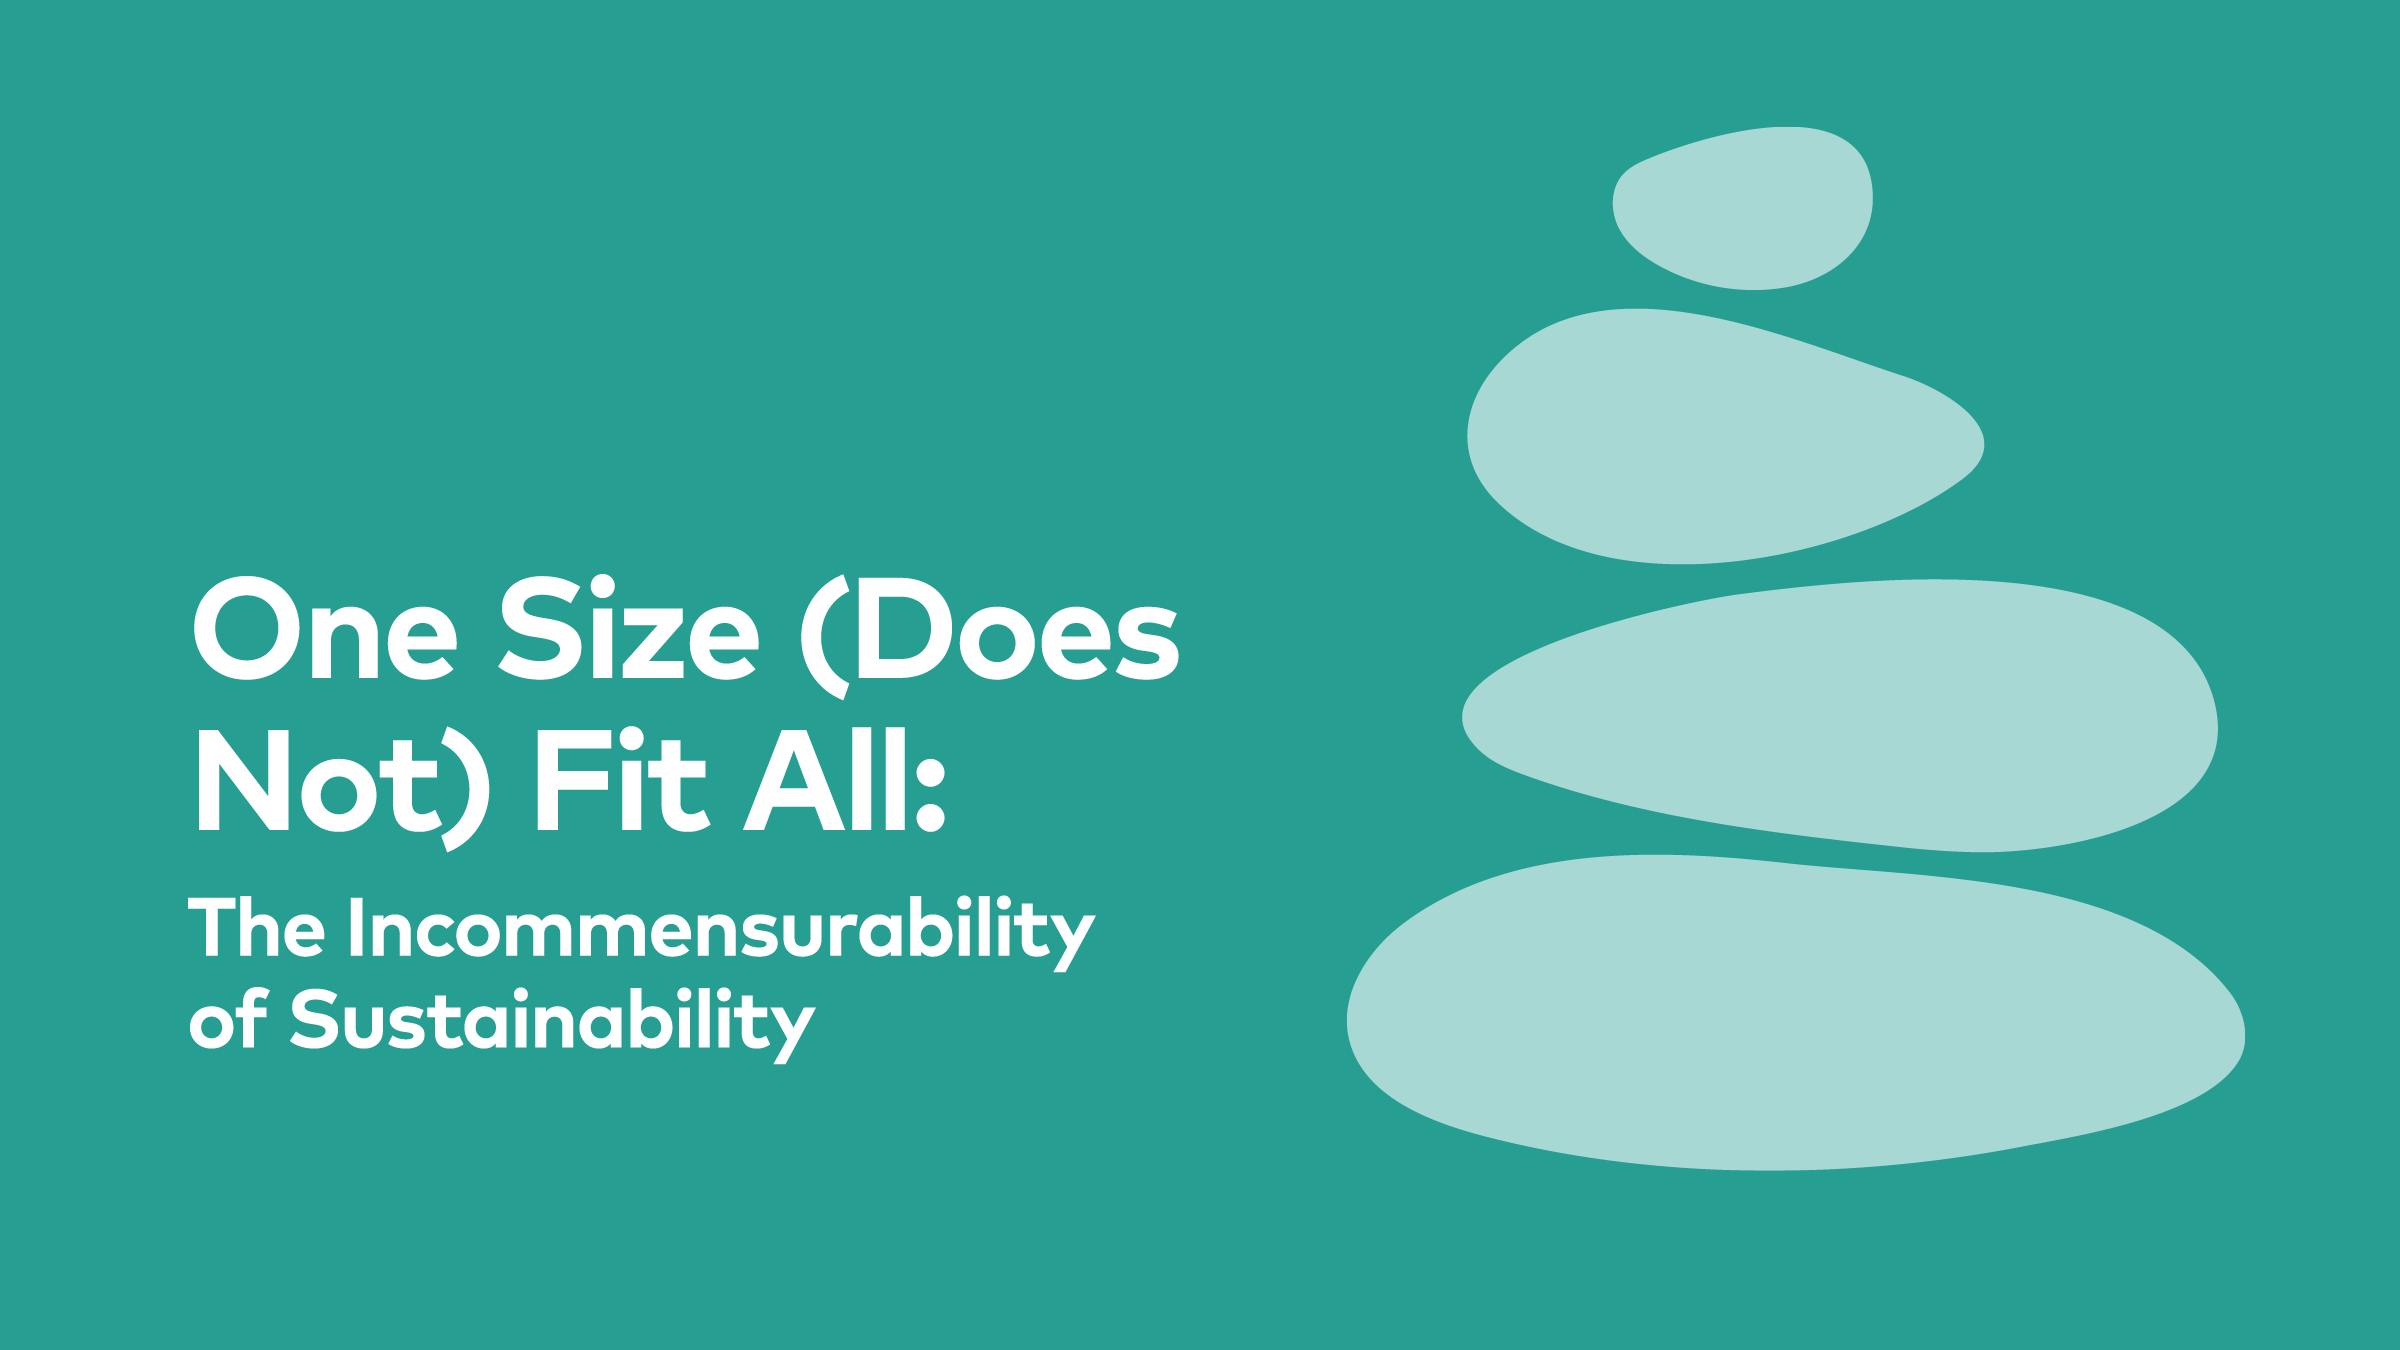 One Size (Does Not) Fit All: The Incommensurability of Sustainability